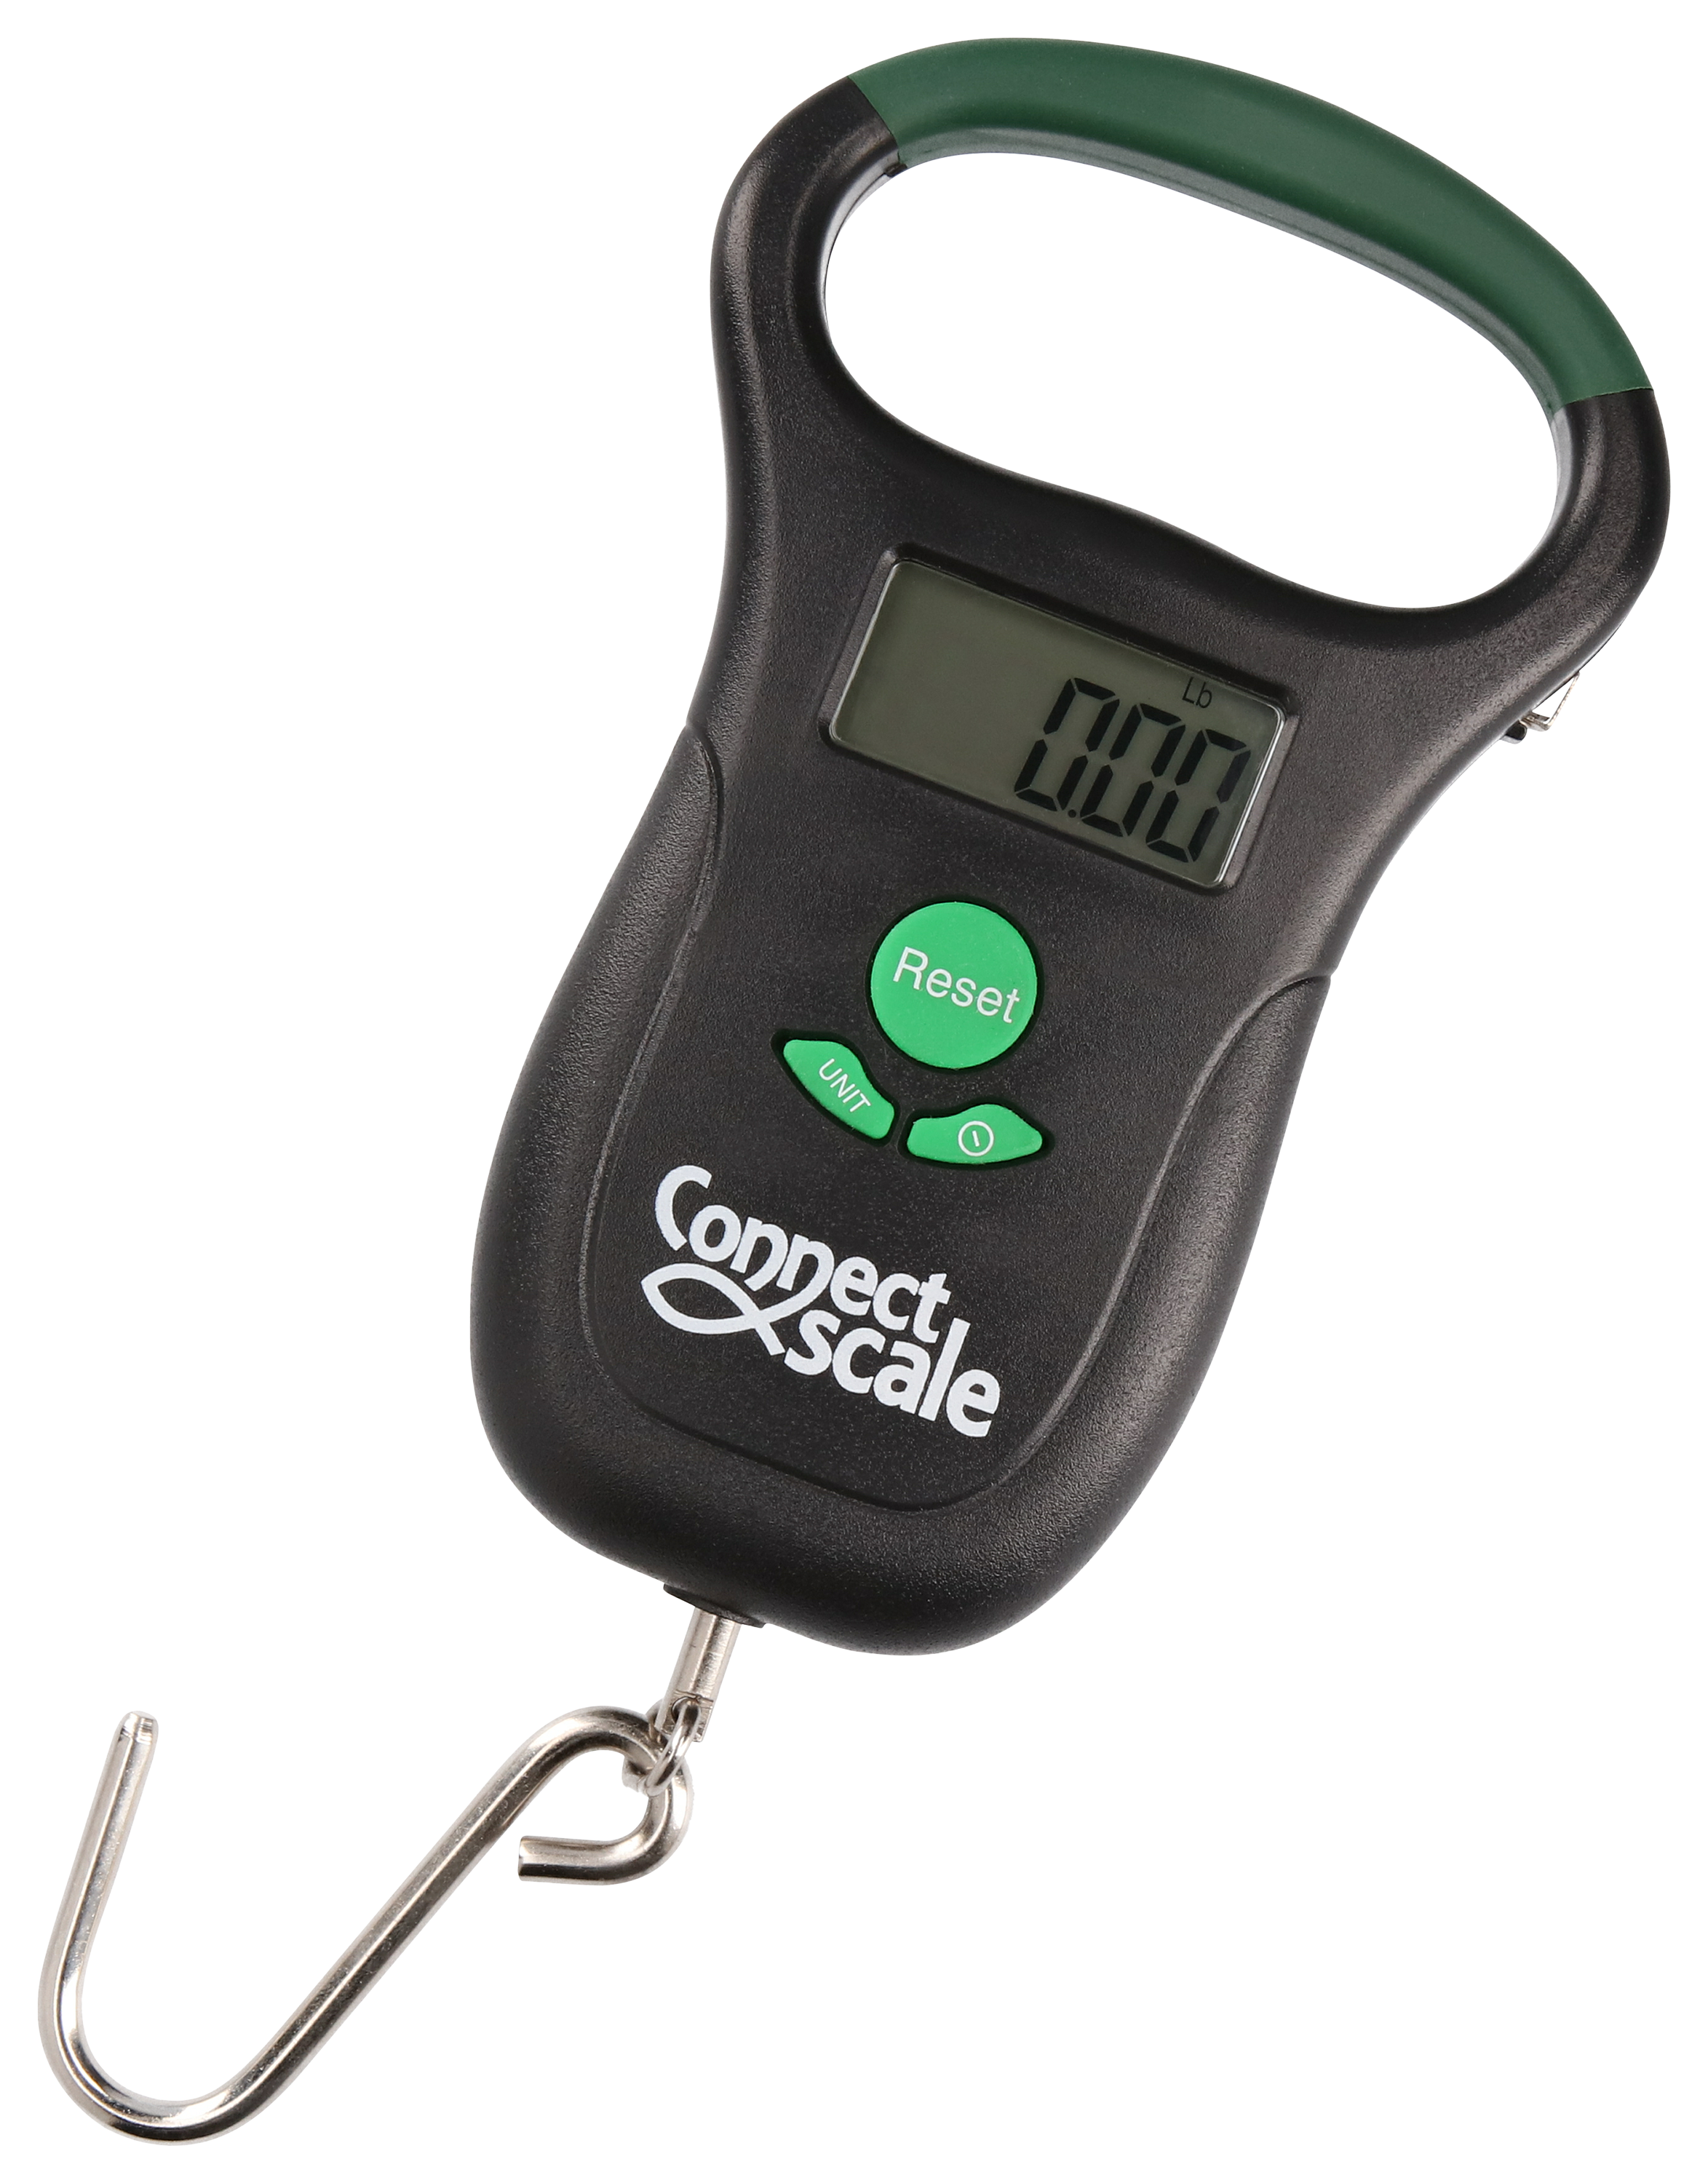 ConnectScale Bluetooth Digital Fish Scale